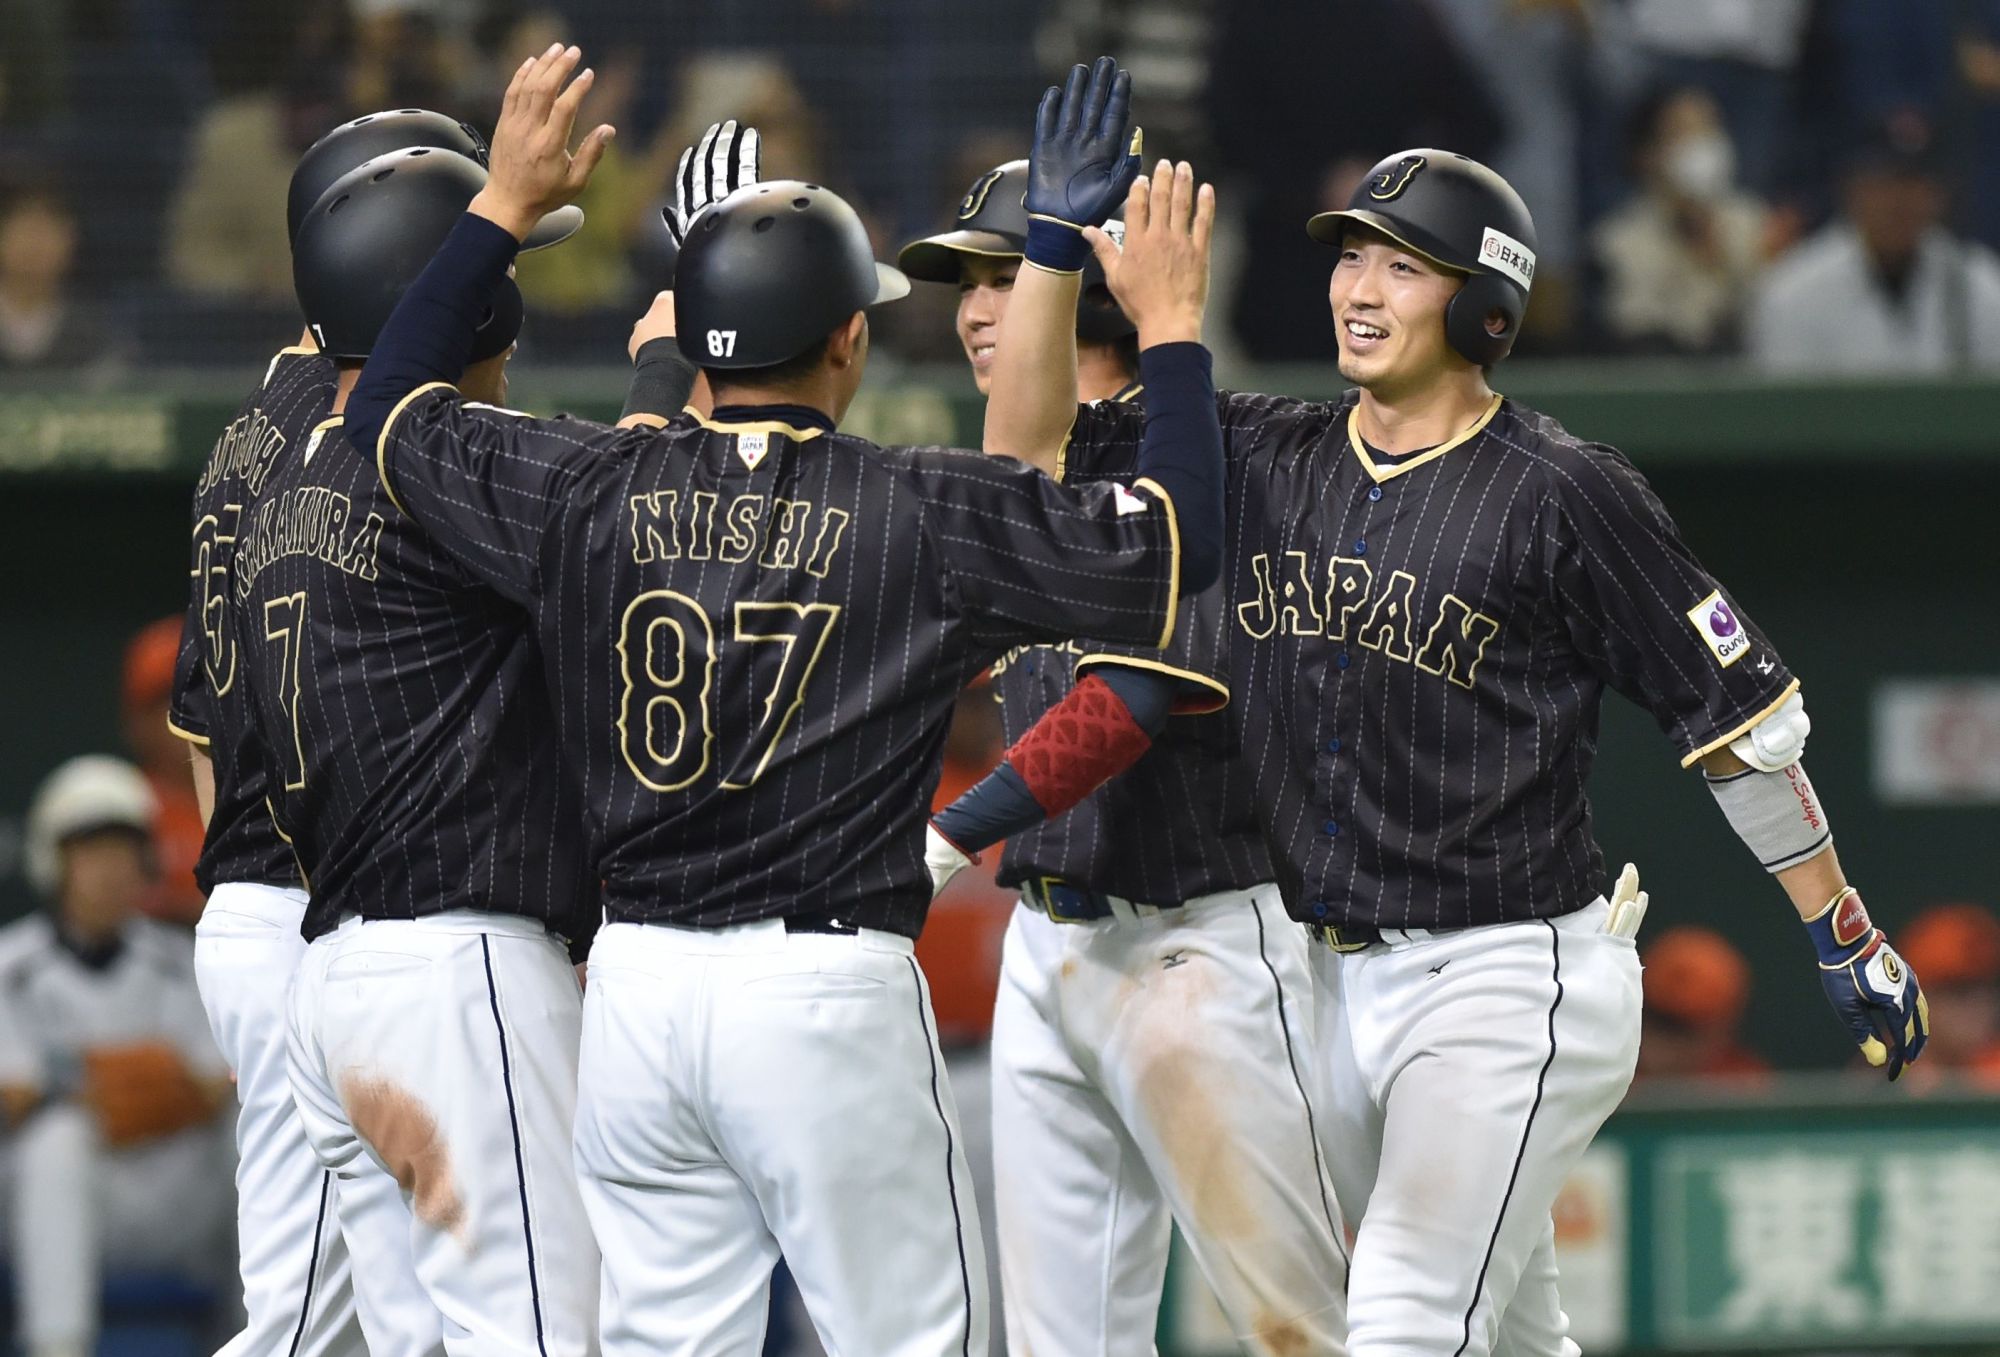 Suzuki sends Japan to victory with 10th-inning grand slam - The